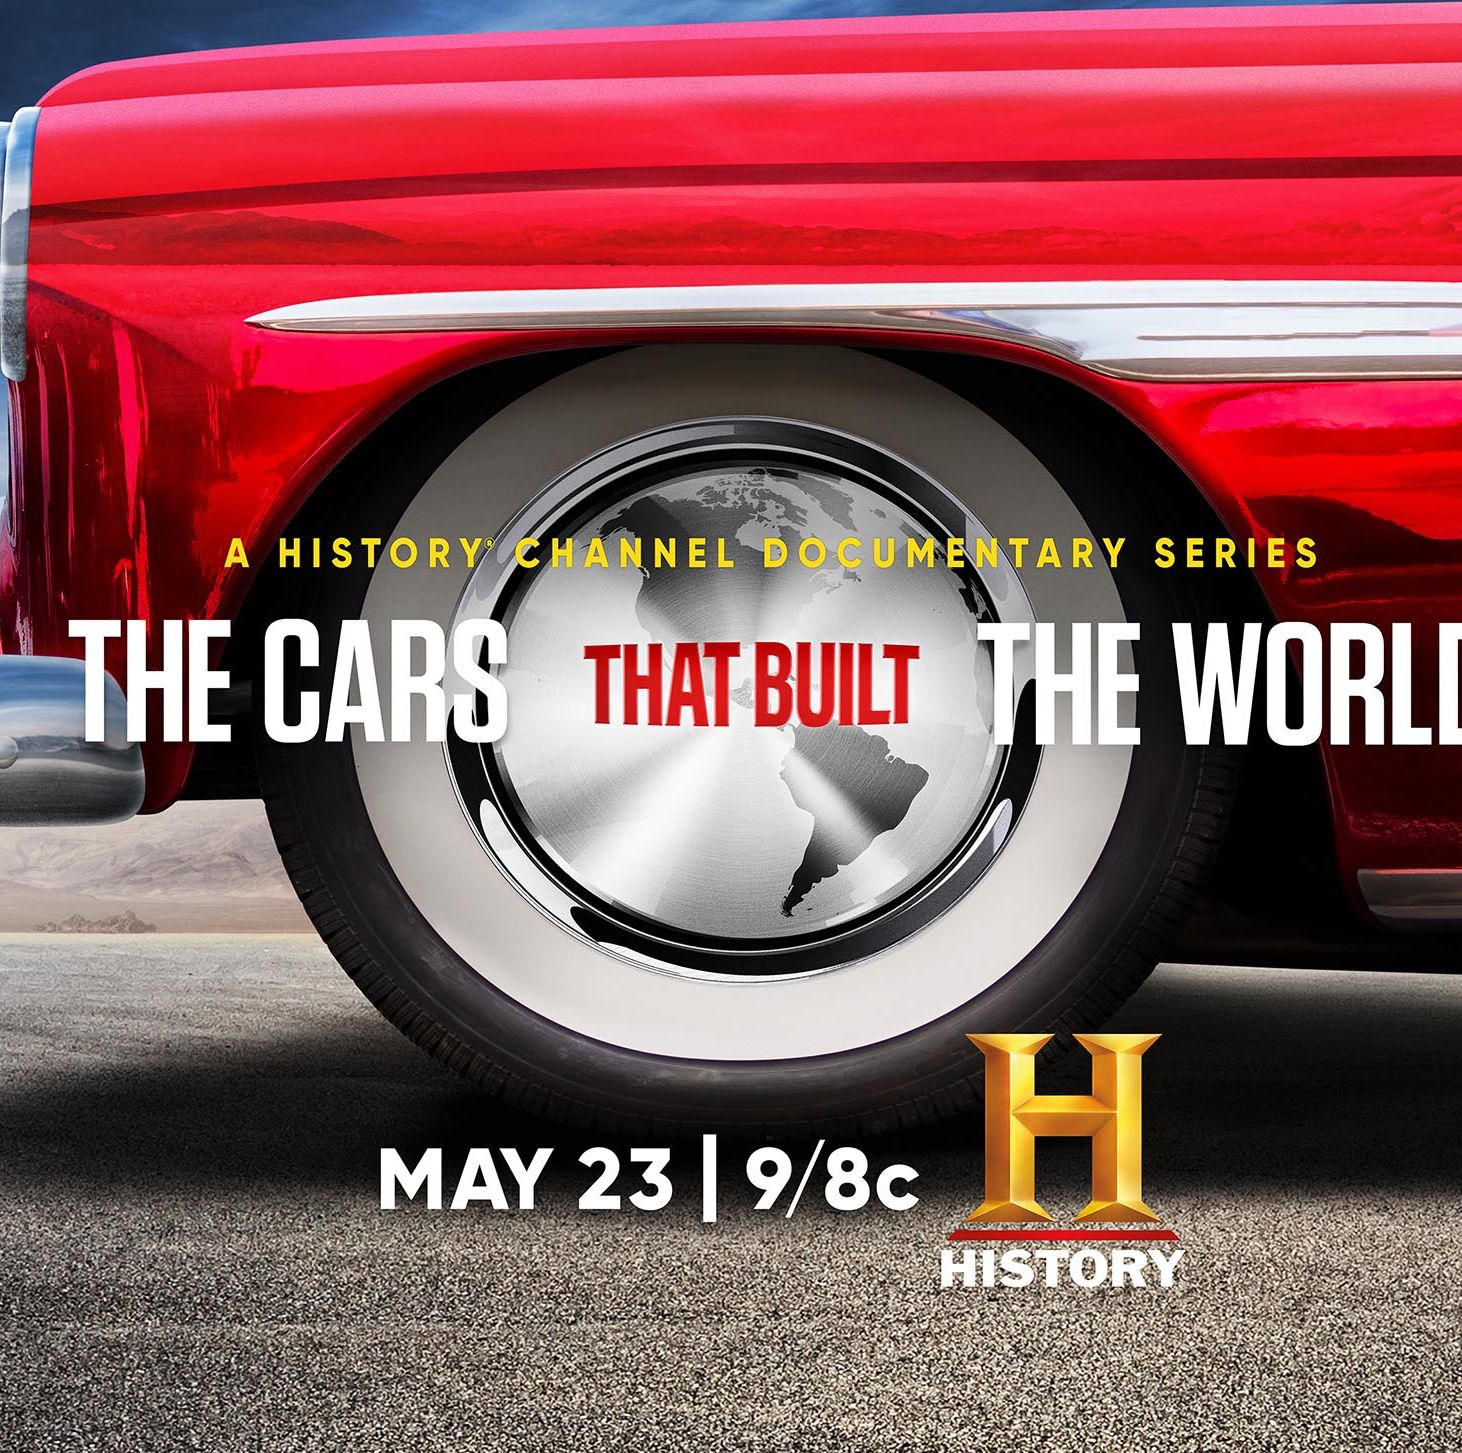 History Channel's New Documentary Reveals the Badass Cars That Built the World